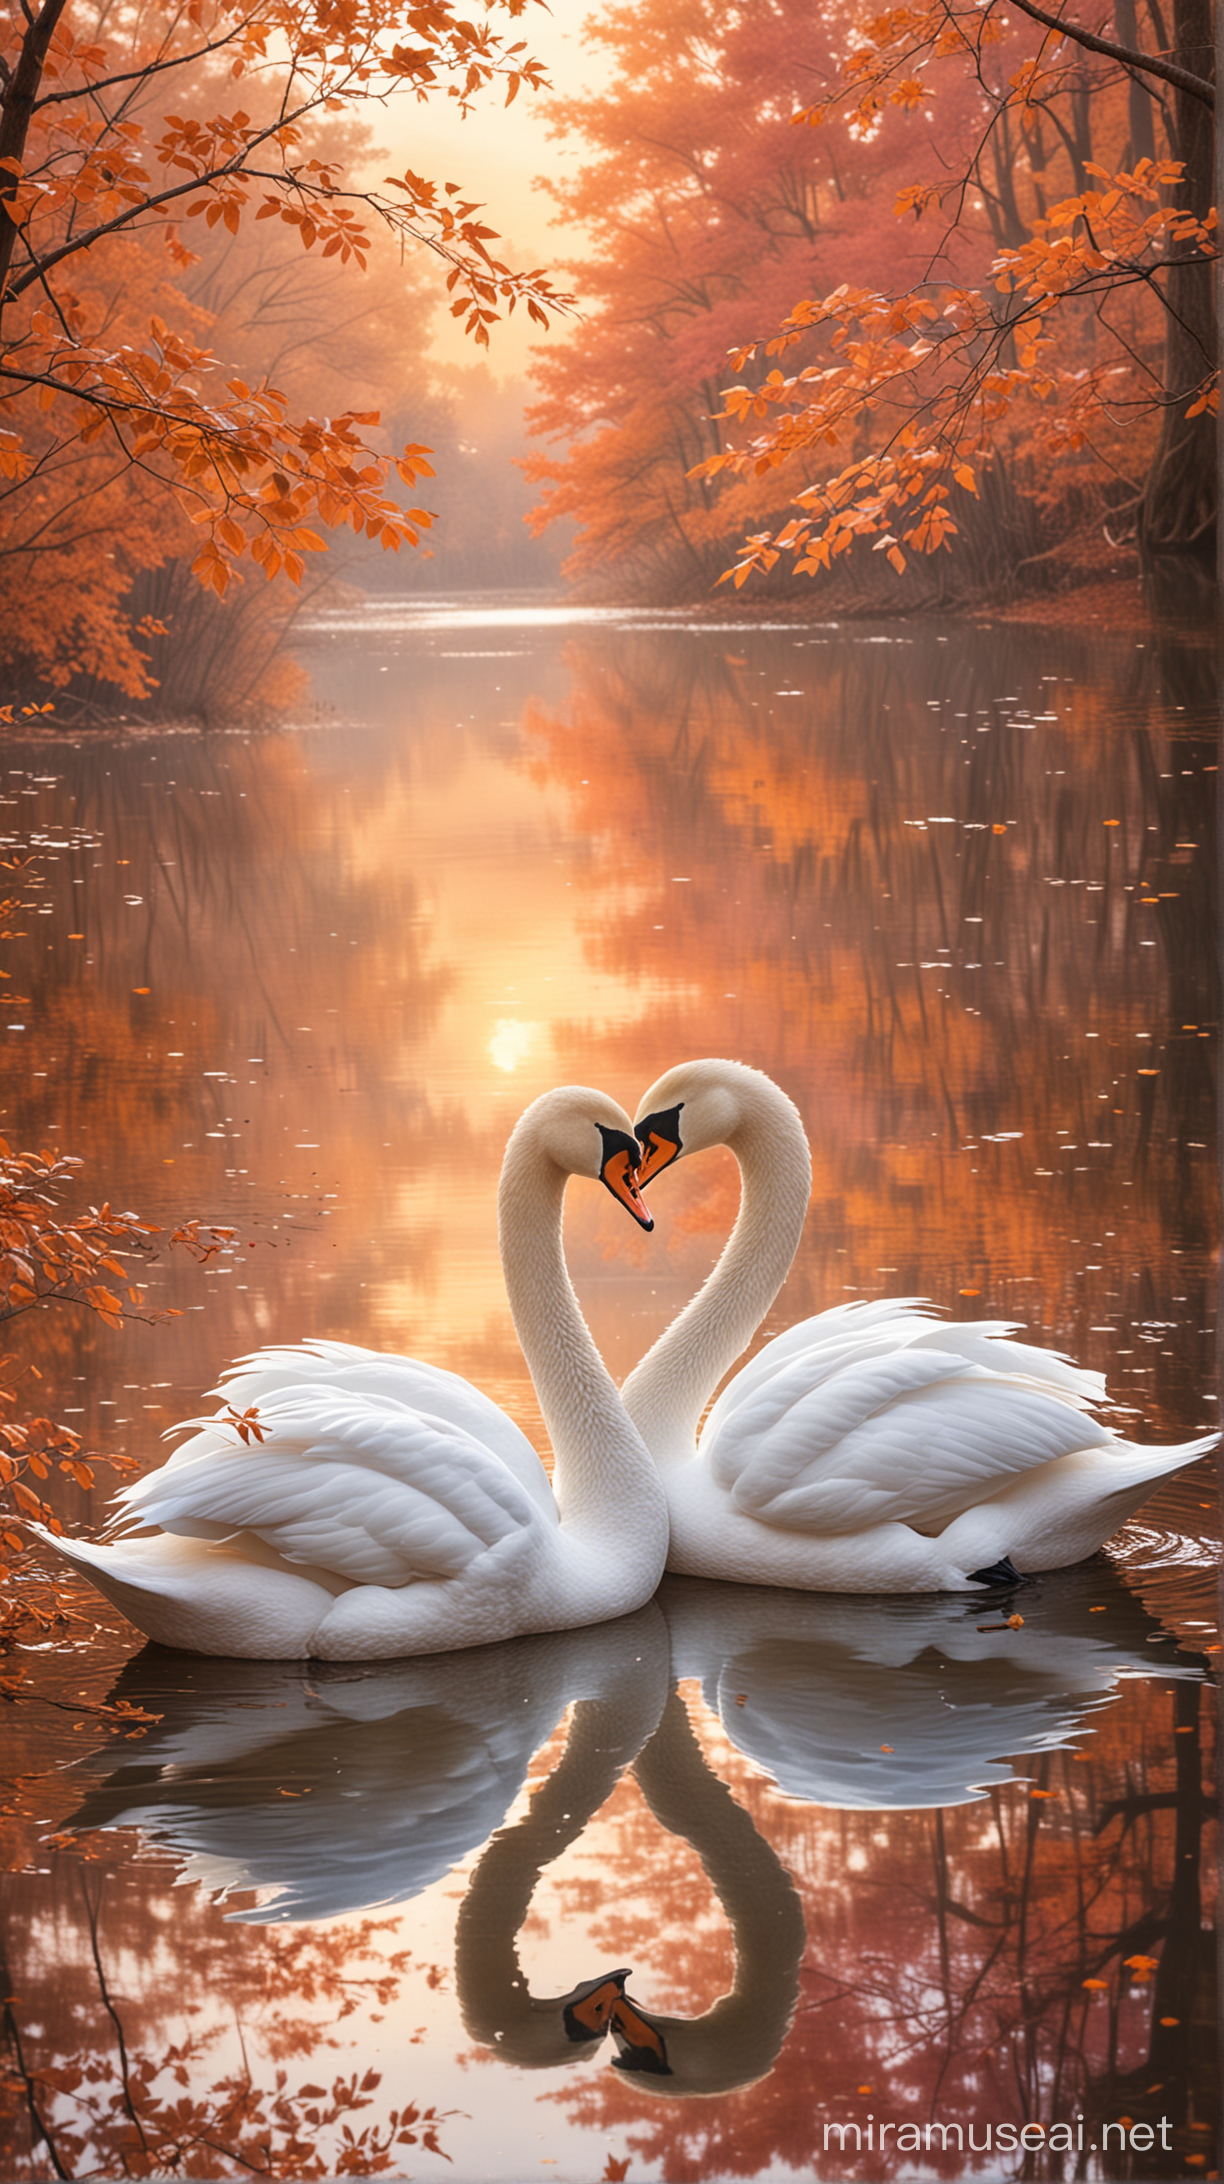 Two elegant swans touching beaks tenderly on a serene lake at sunset, with reflections of pastel-colored skies in the water, surrounded by gently falling autumn leaves.